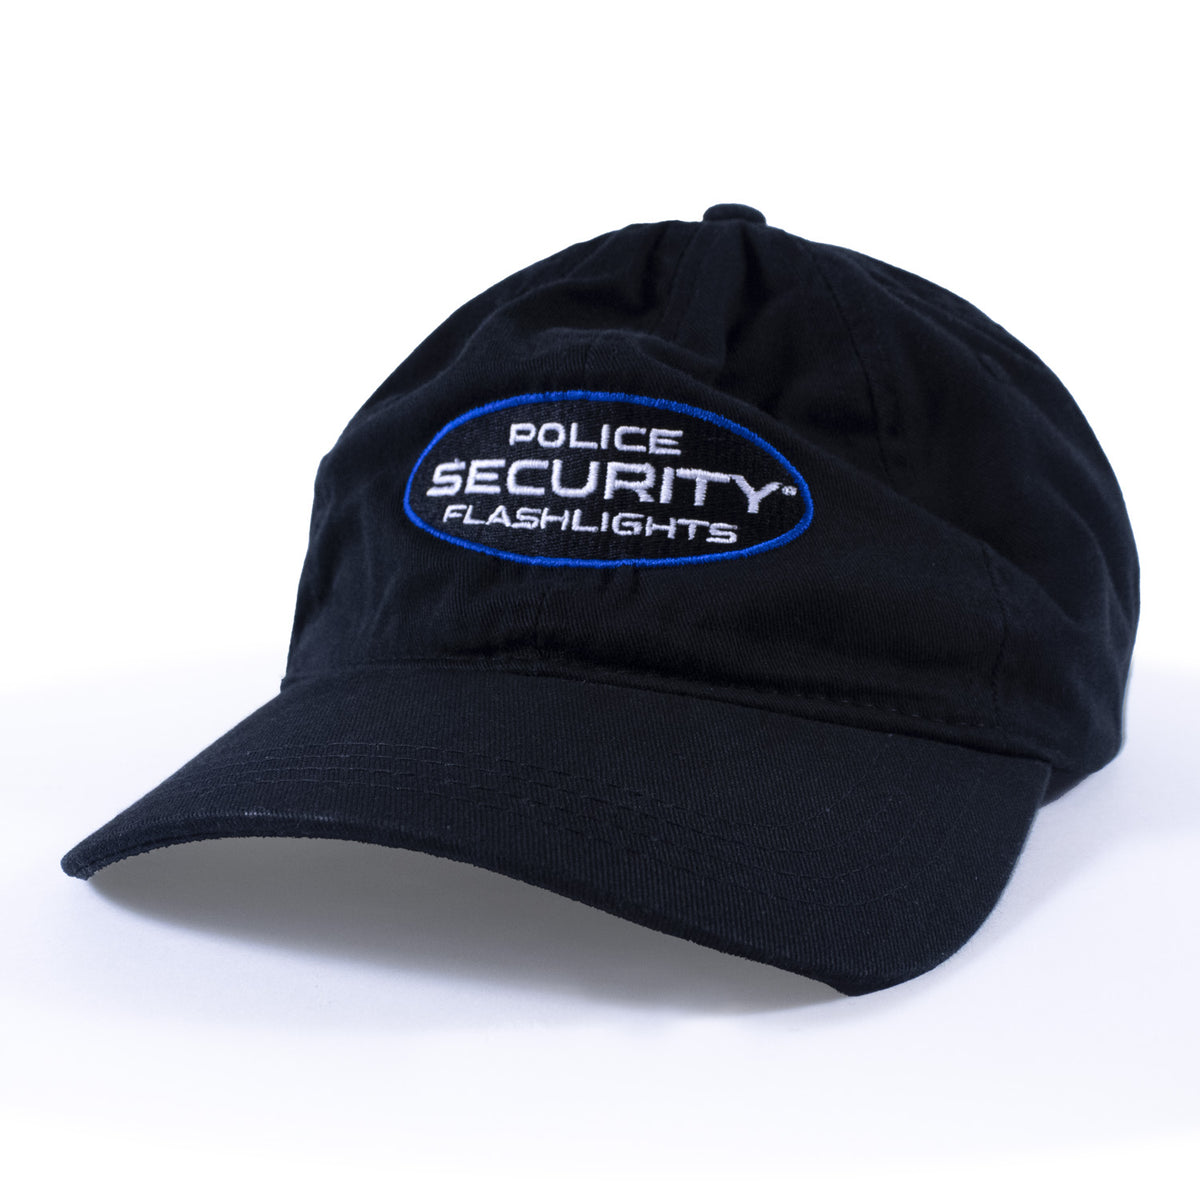 Police Security Baseball Hat